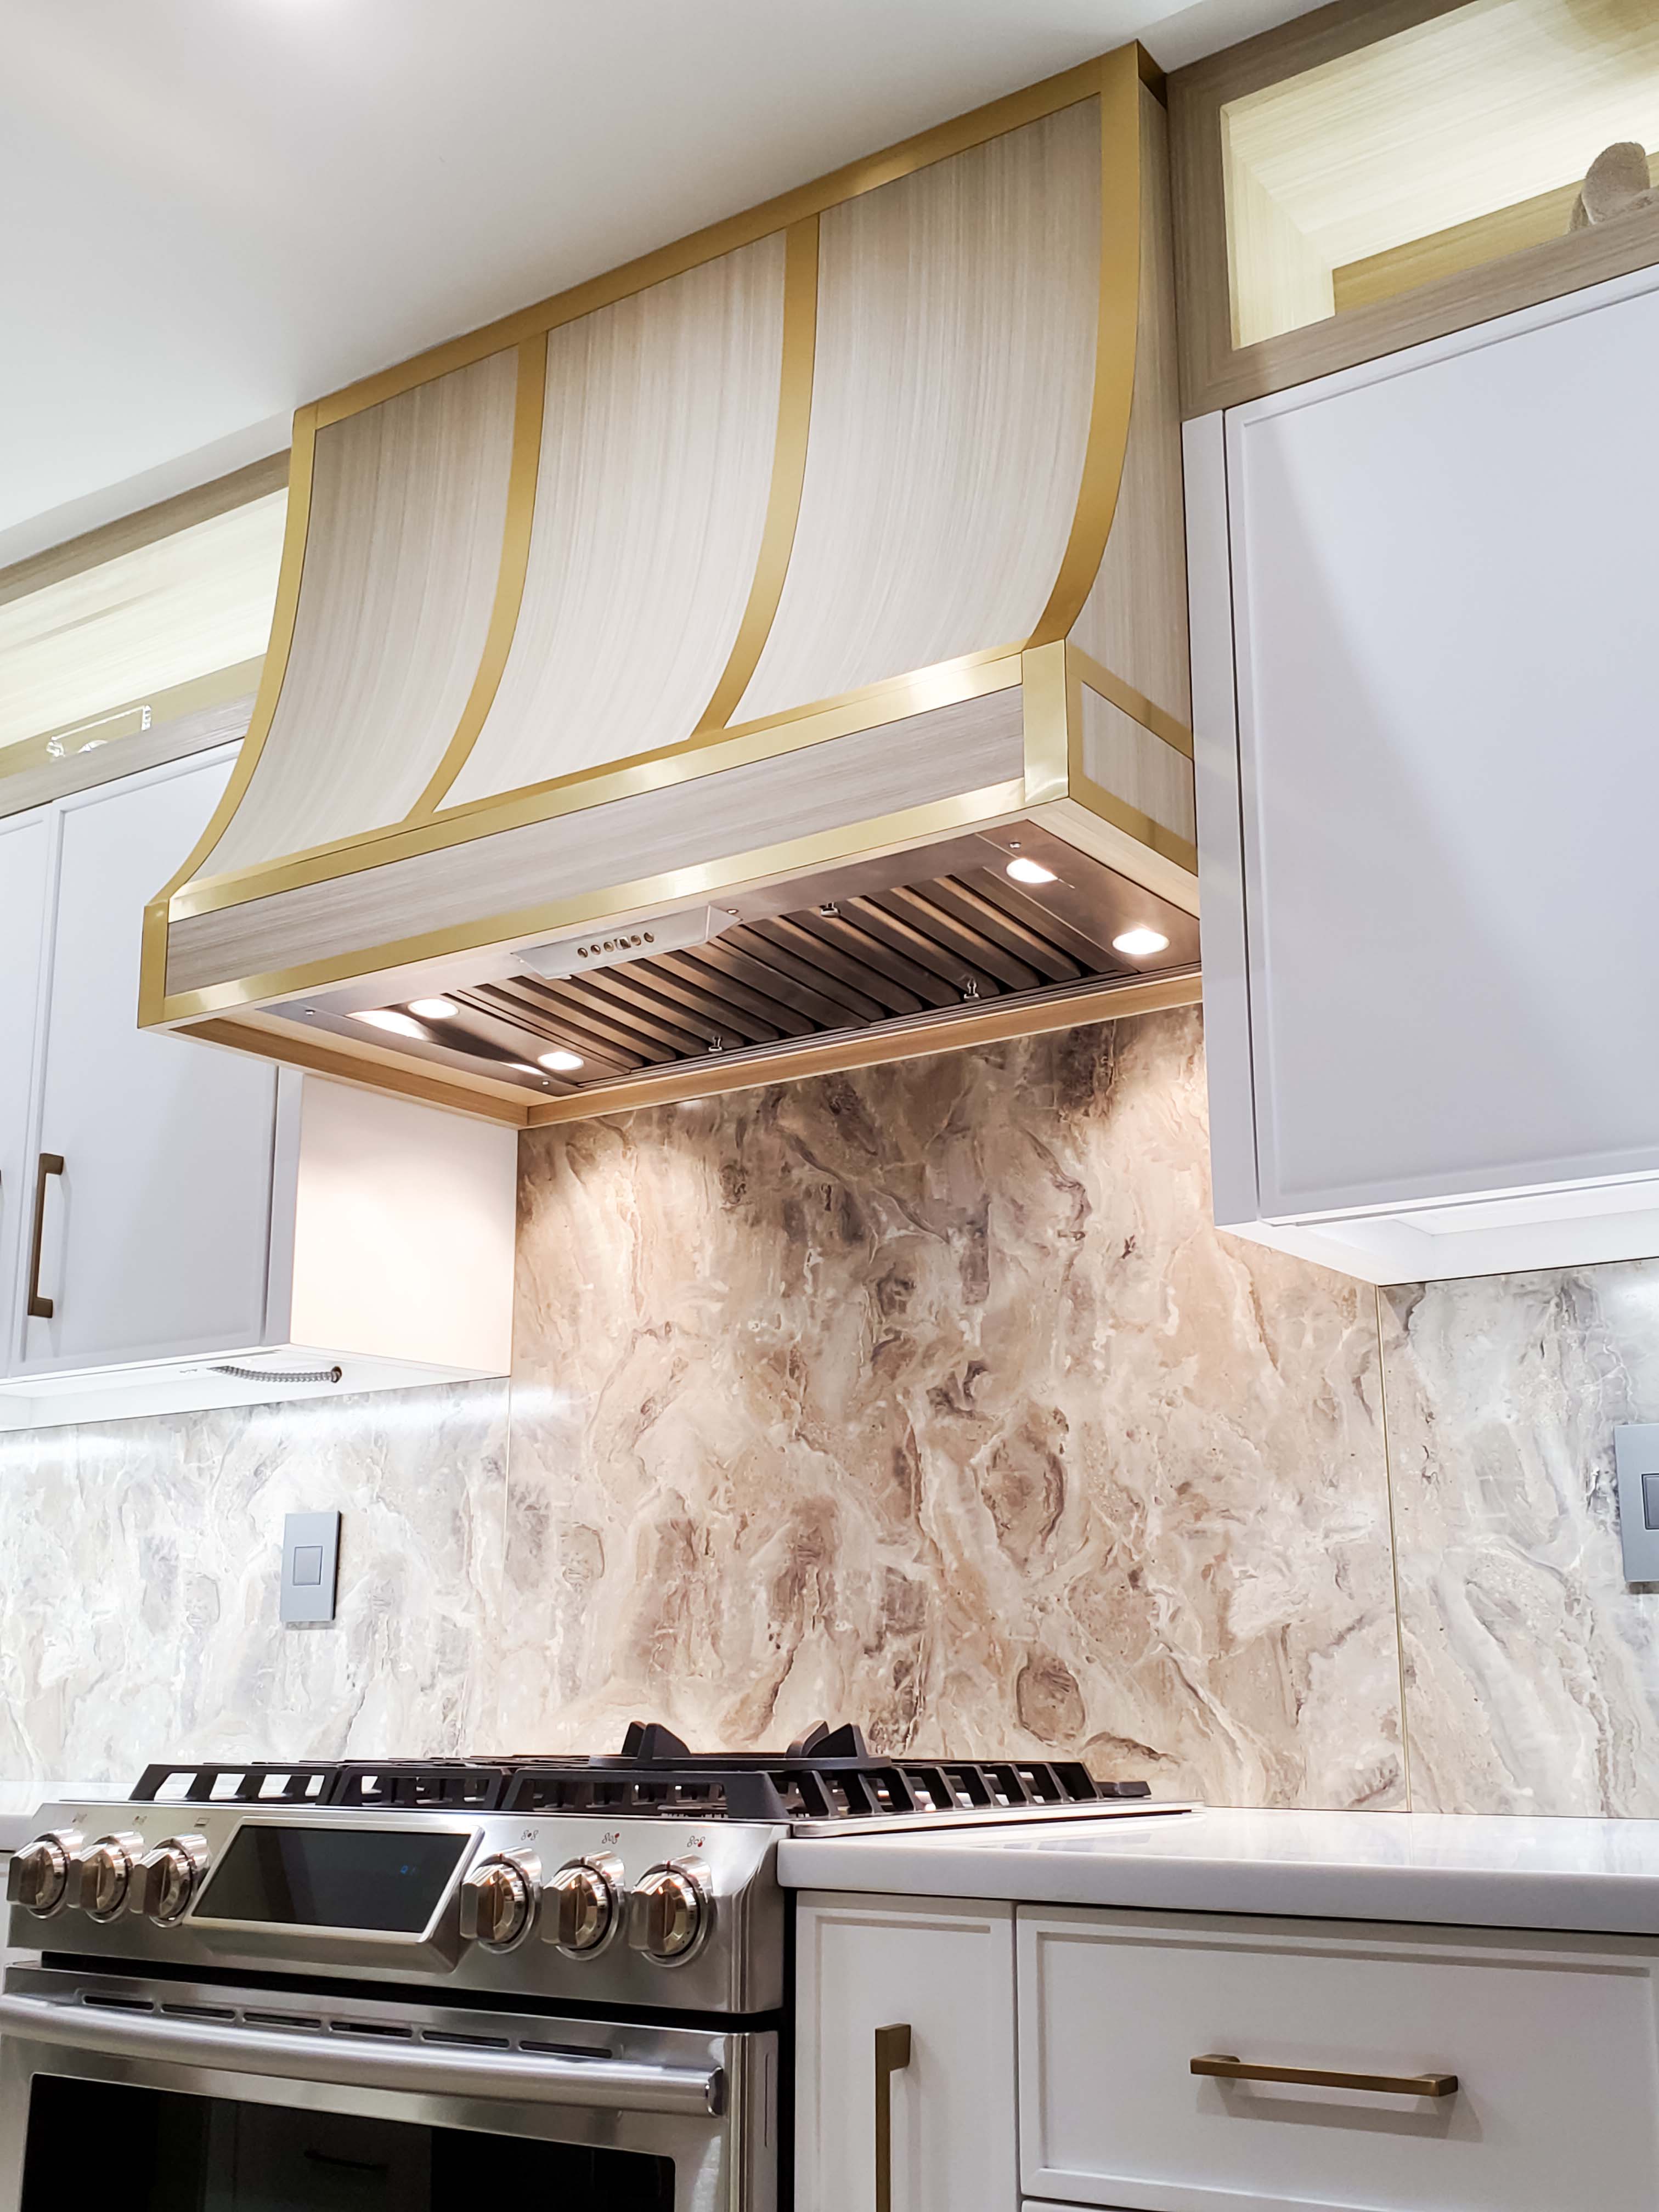 White range hood cover with golden trim